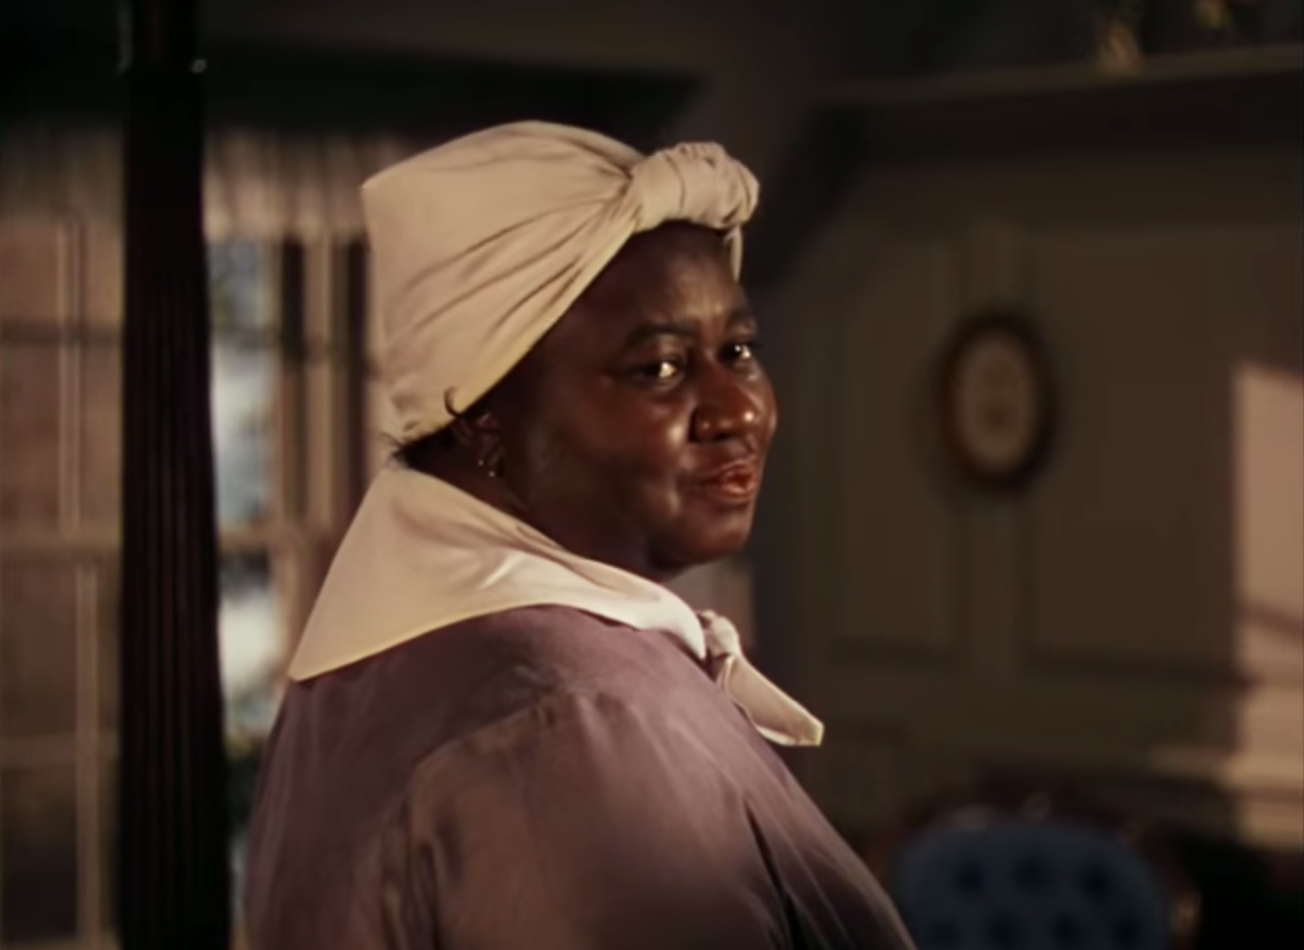 Screenshot of Hattie McDaniel from Gone With the Wind movie trailer on YouTube by Warner Bros.